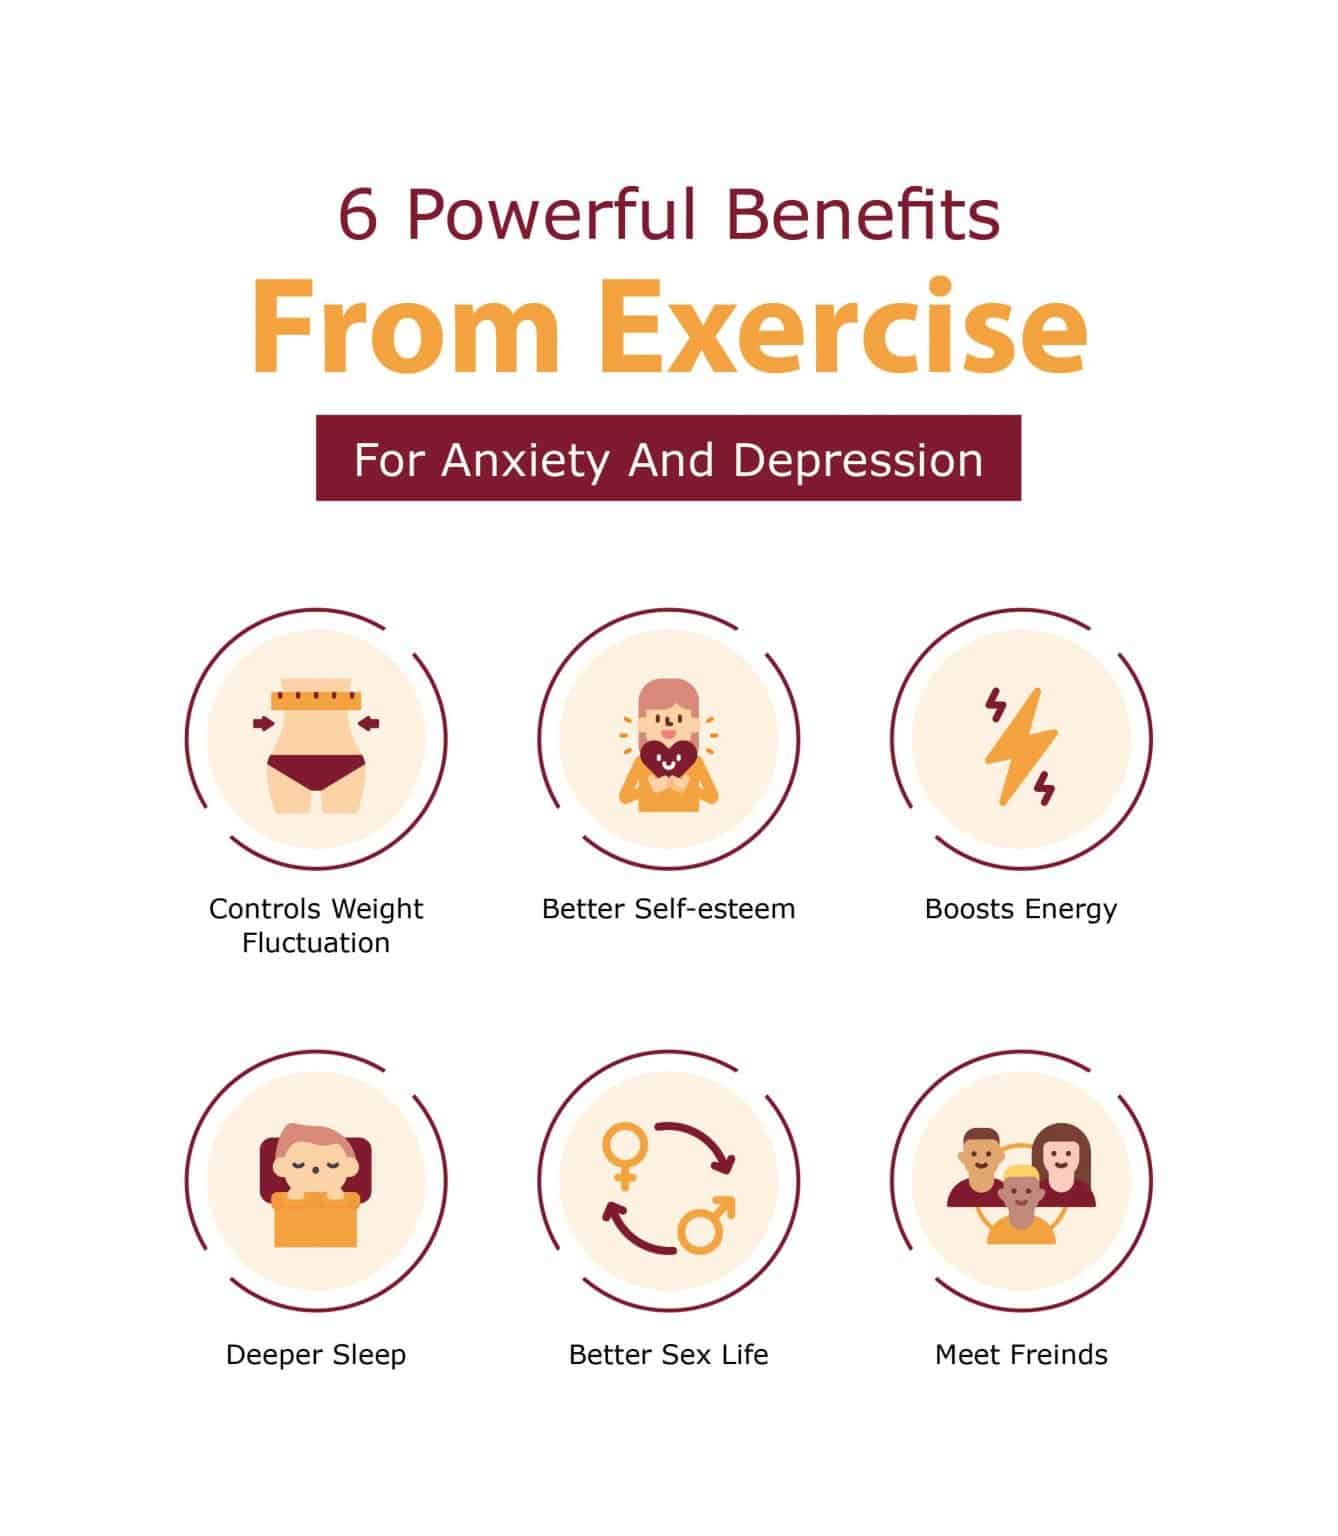 6 Powerful Benefits From Exercise [Anxiety and Depression]